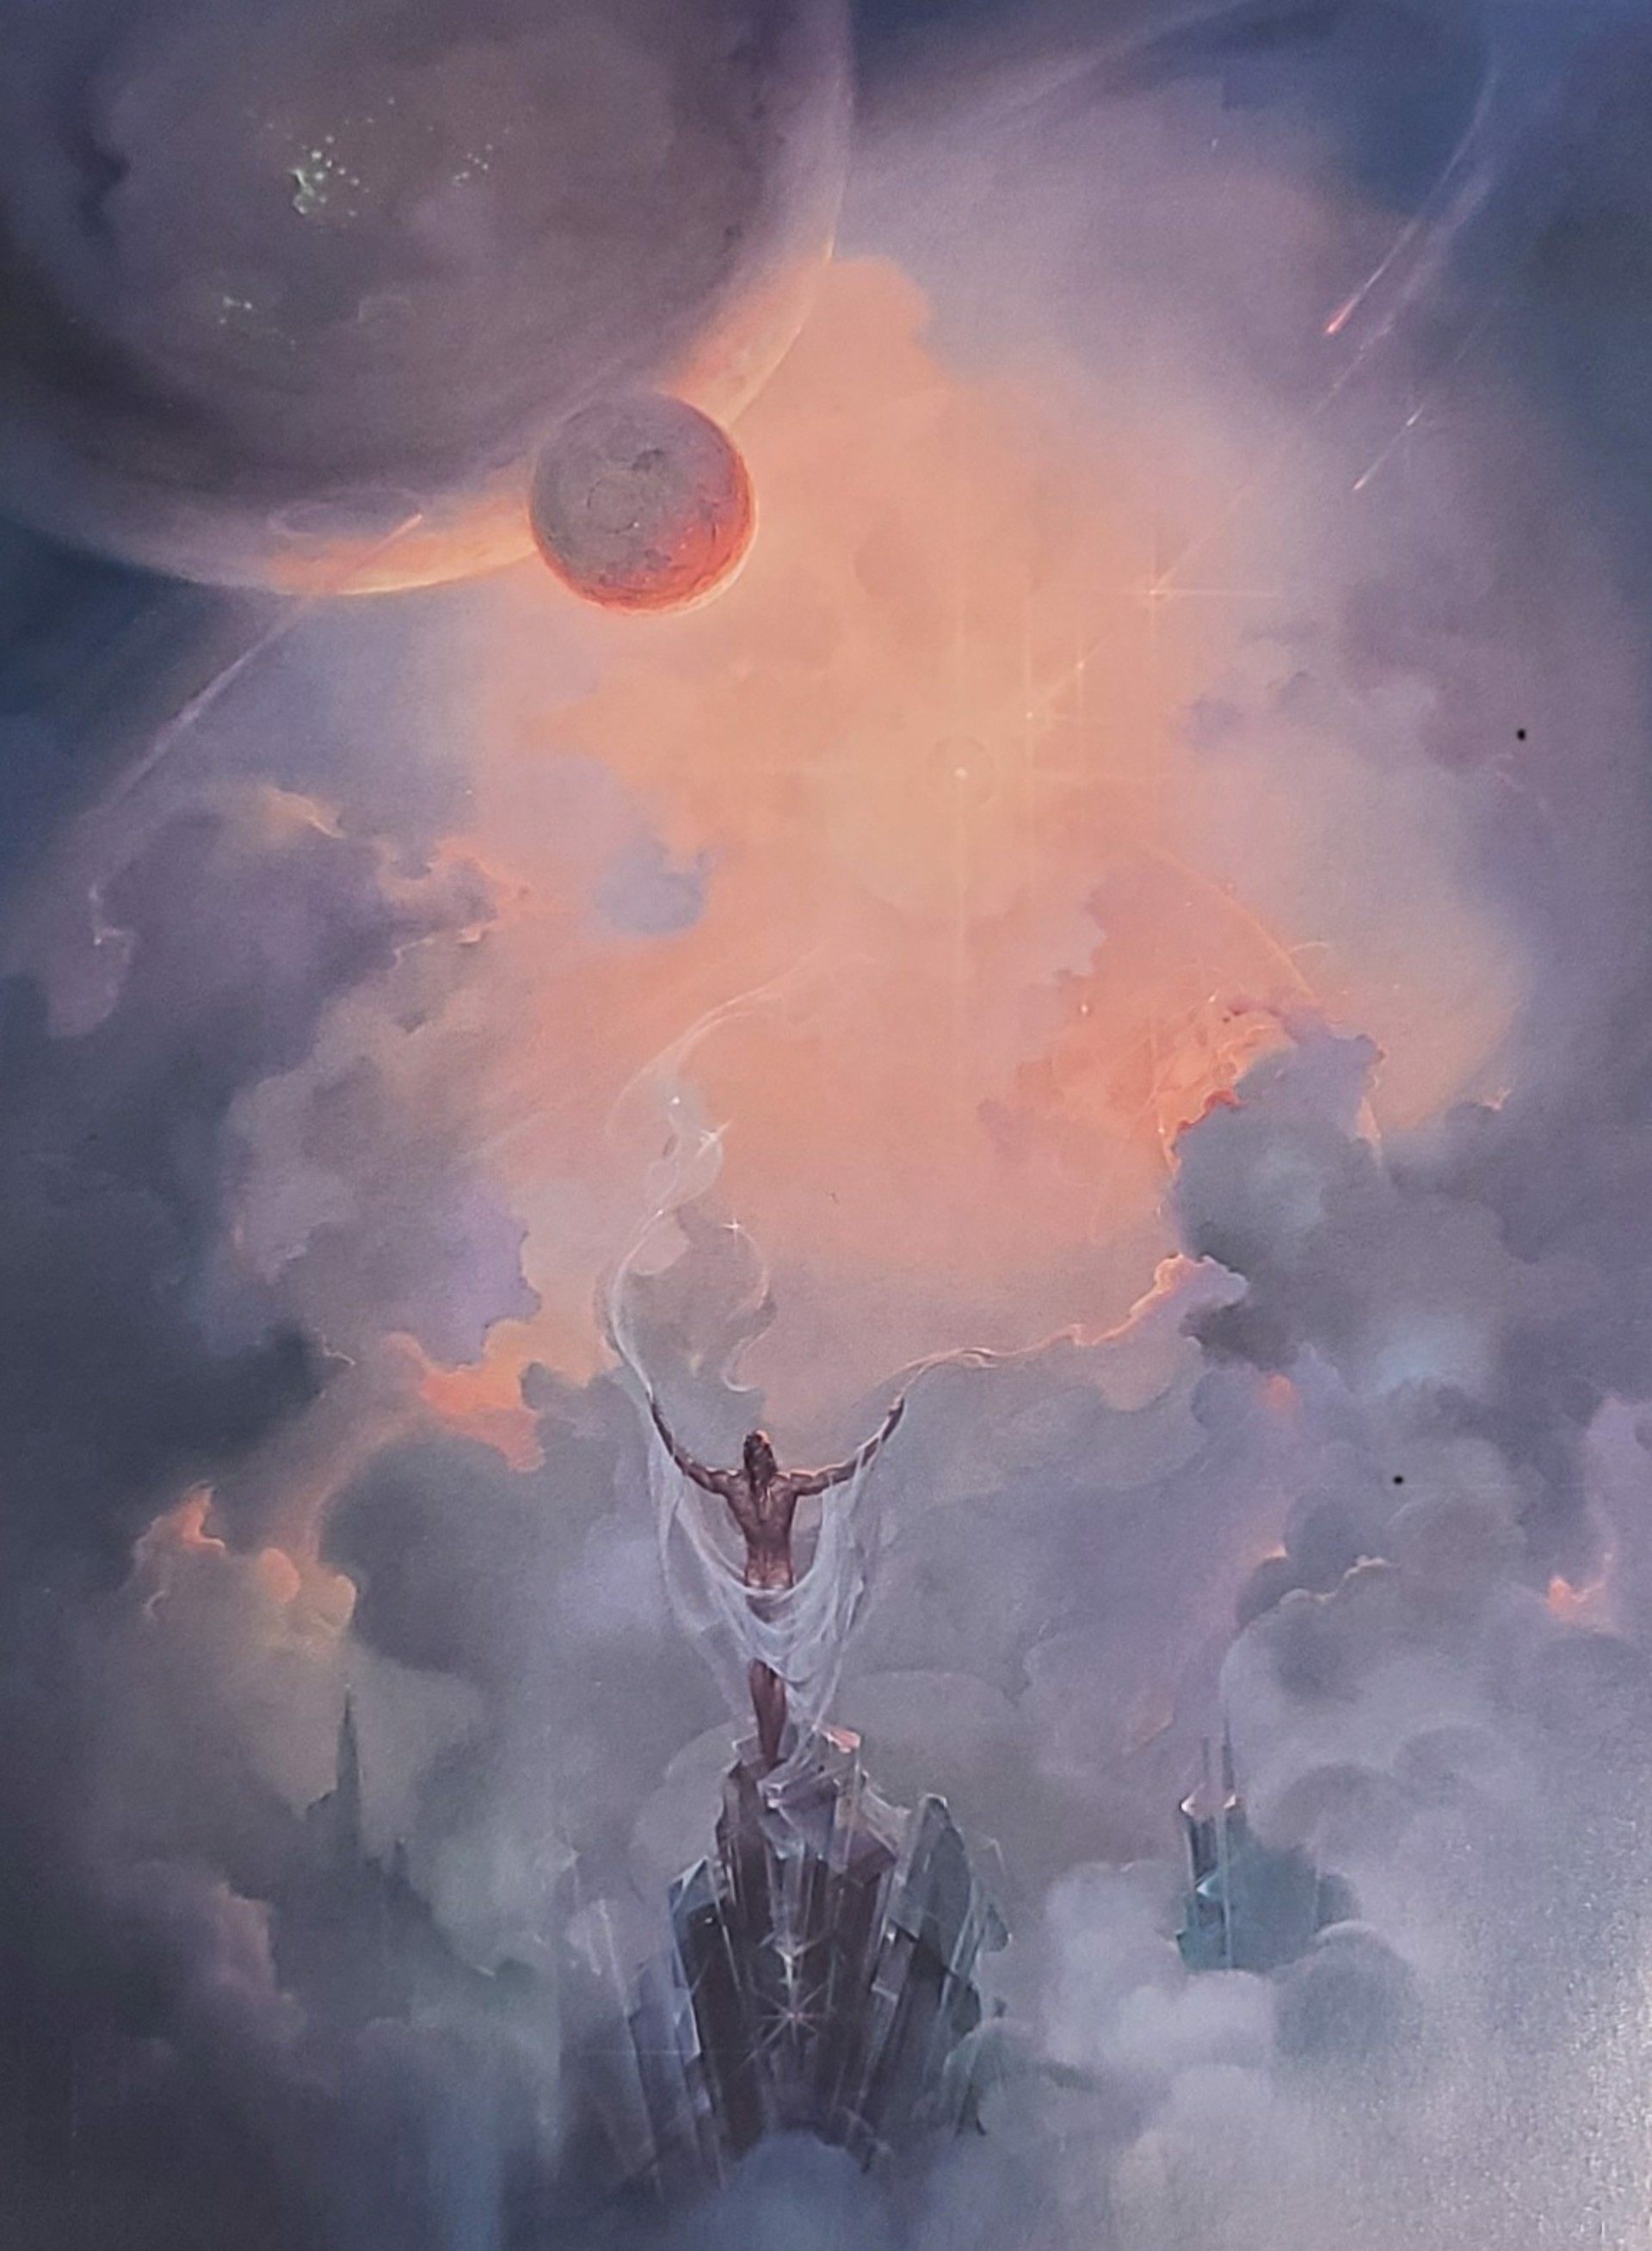 In Contemplation of the Universe by John Pitre